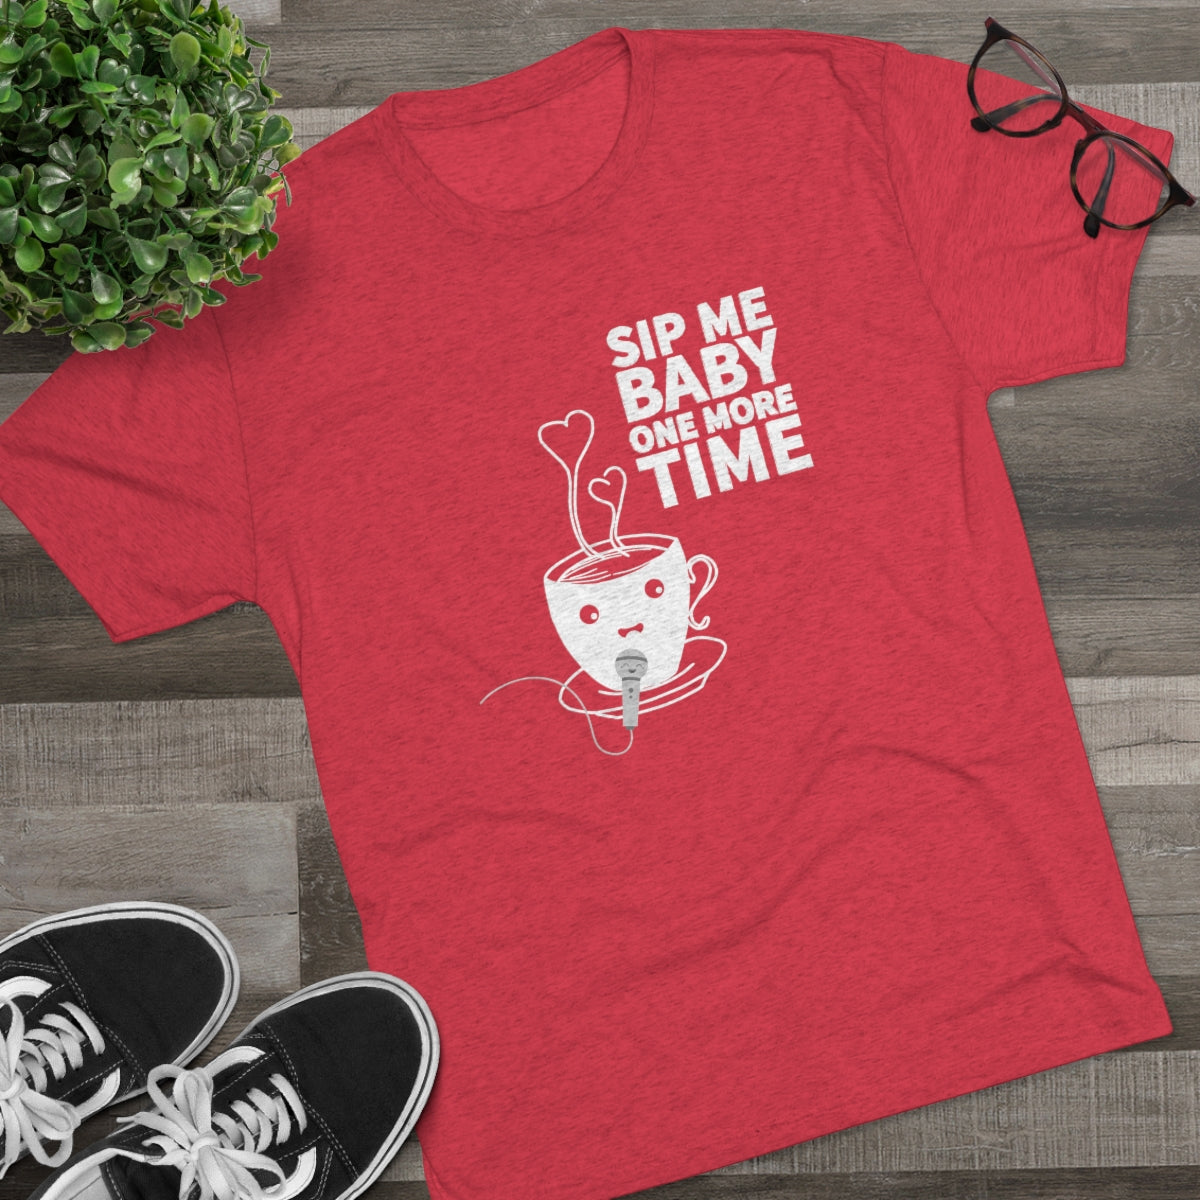 Sip Me Baby Graphic Tee -   - Harney & Sons Fine Teas